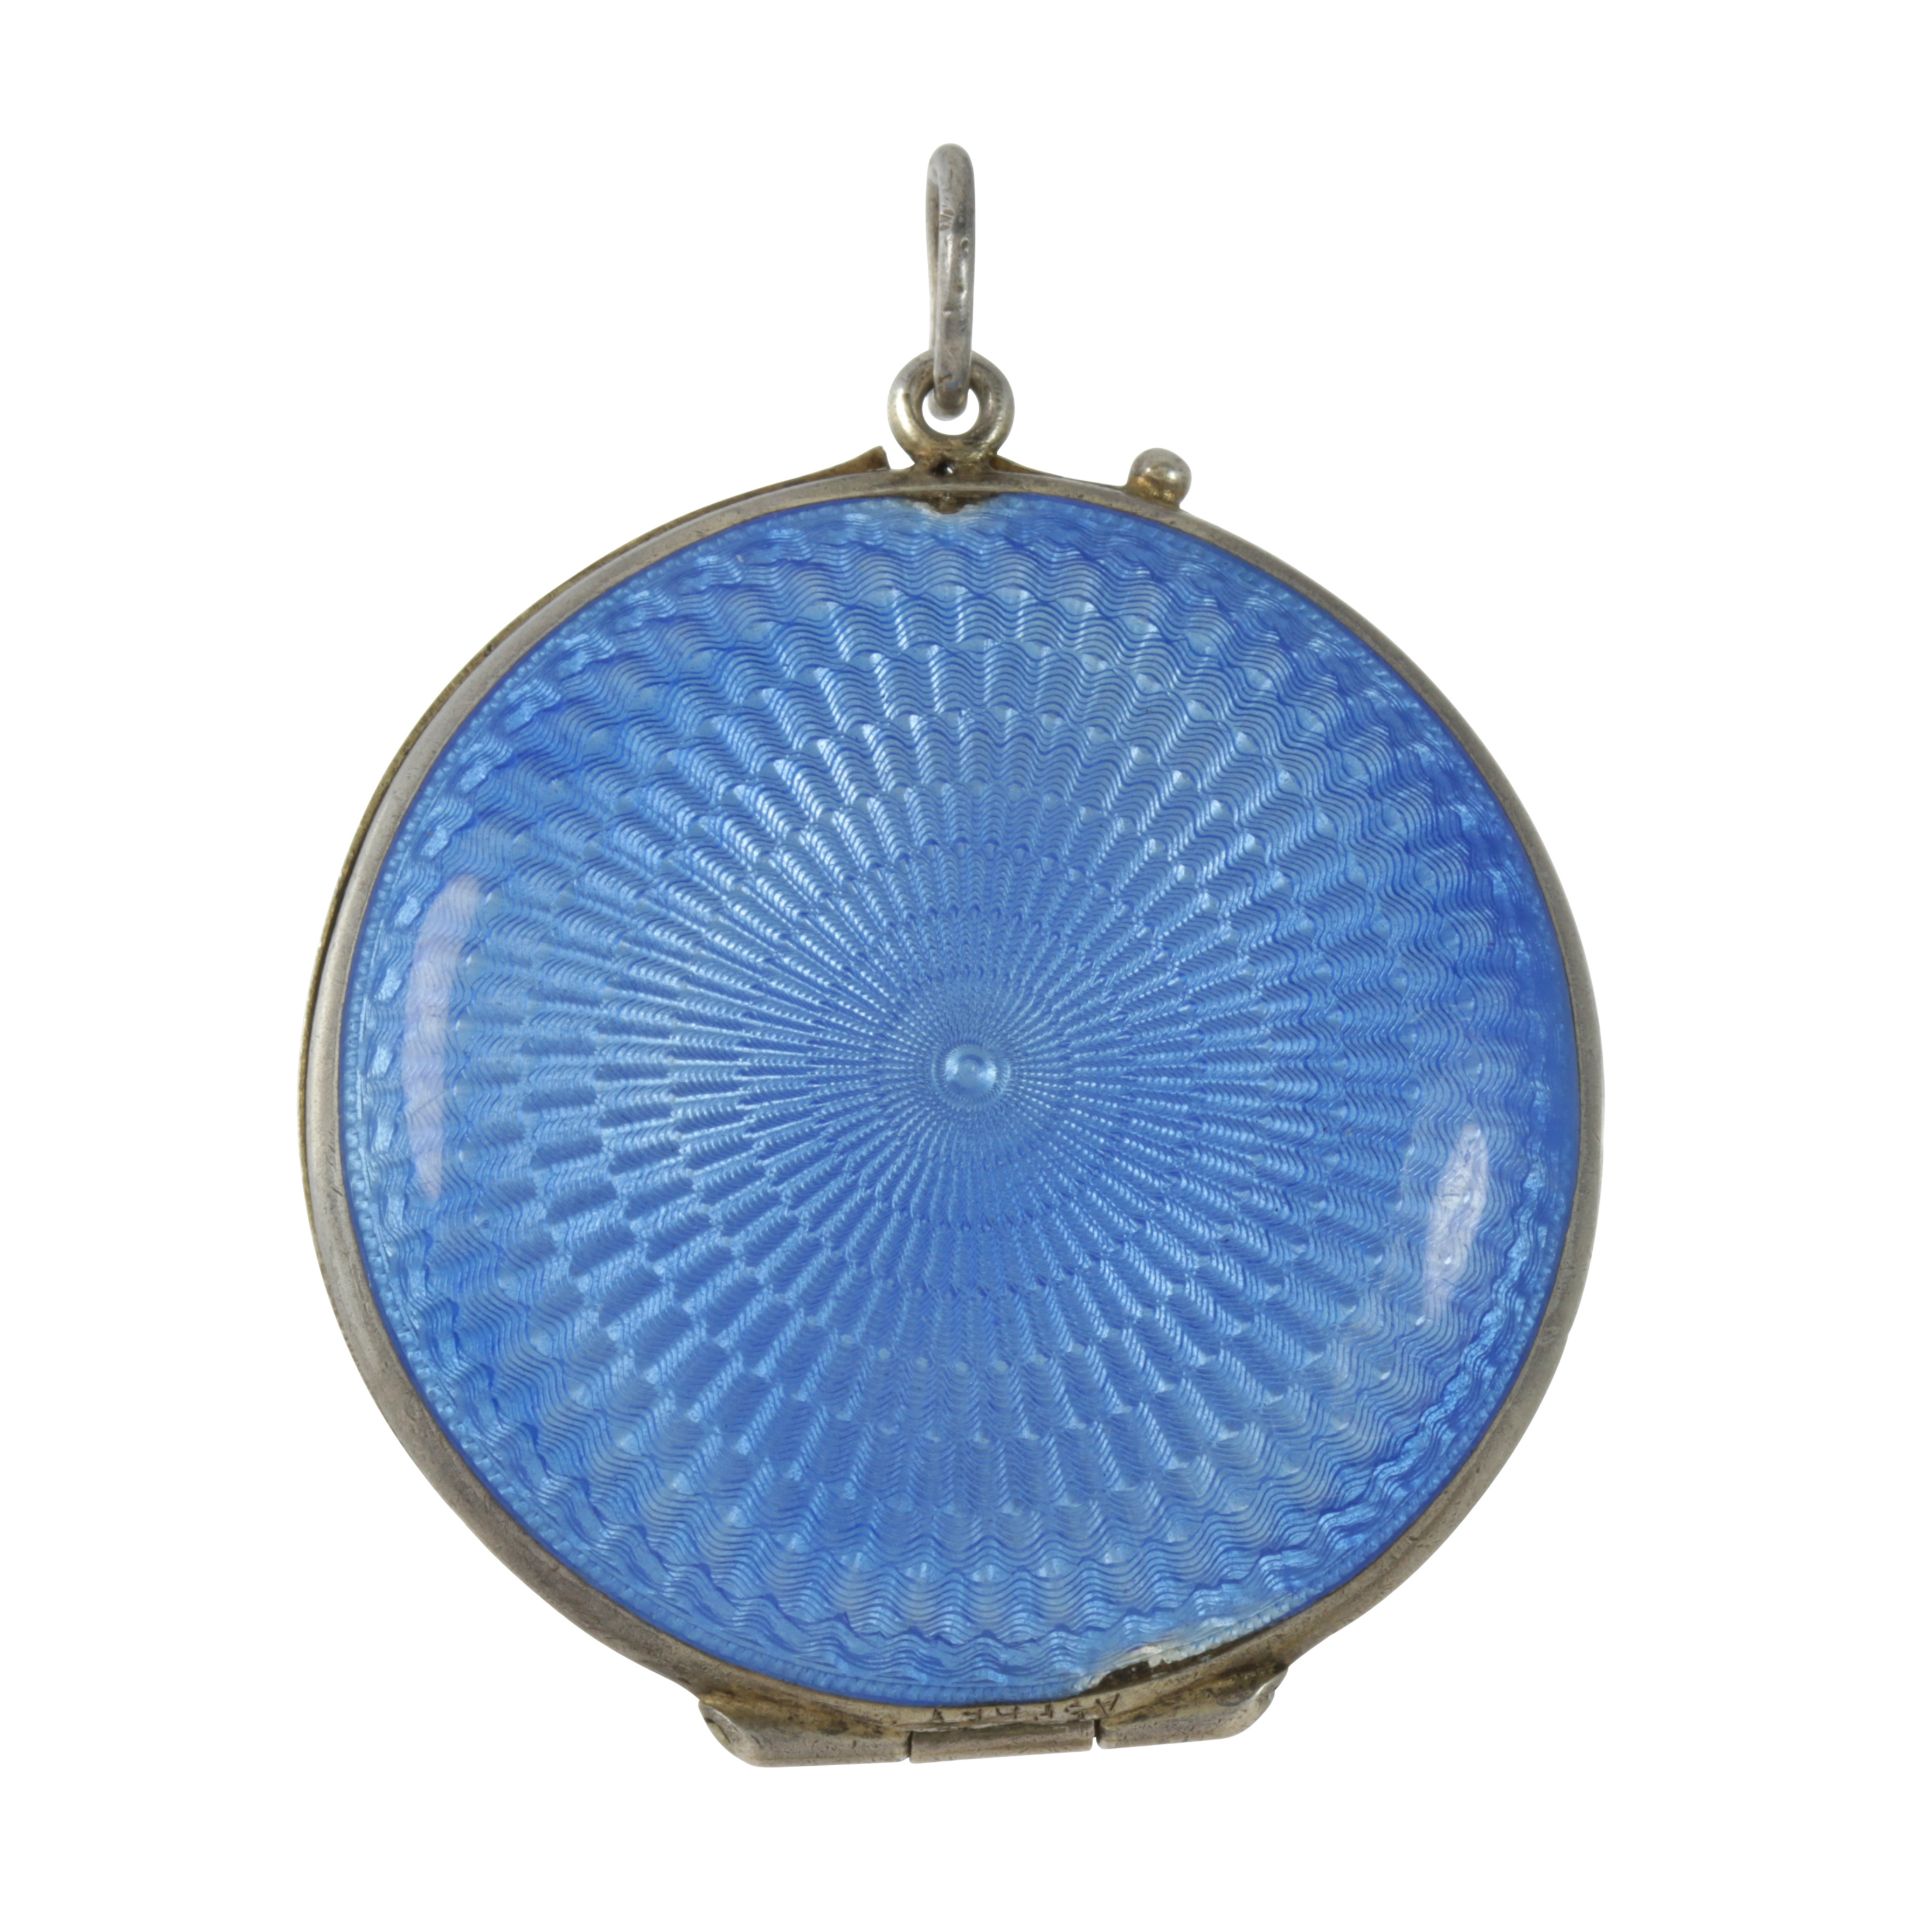 AN ANTIQUE ENAMEL COMPACT / LOCKET, MARIUS HAMMER in silver of circular form, decorated with blue